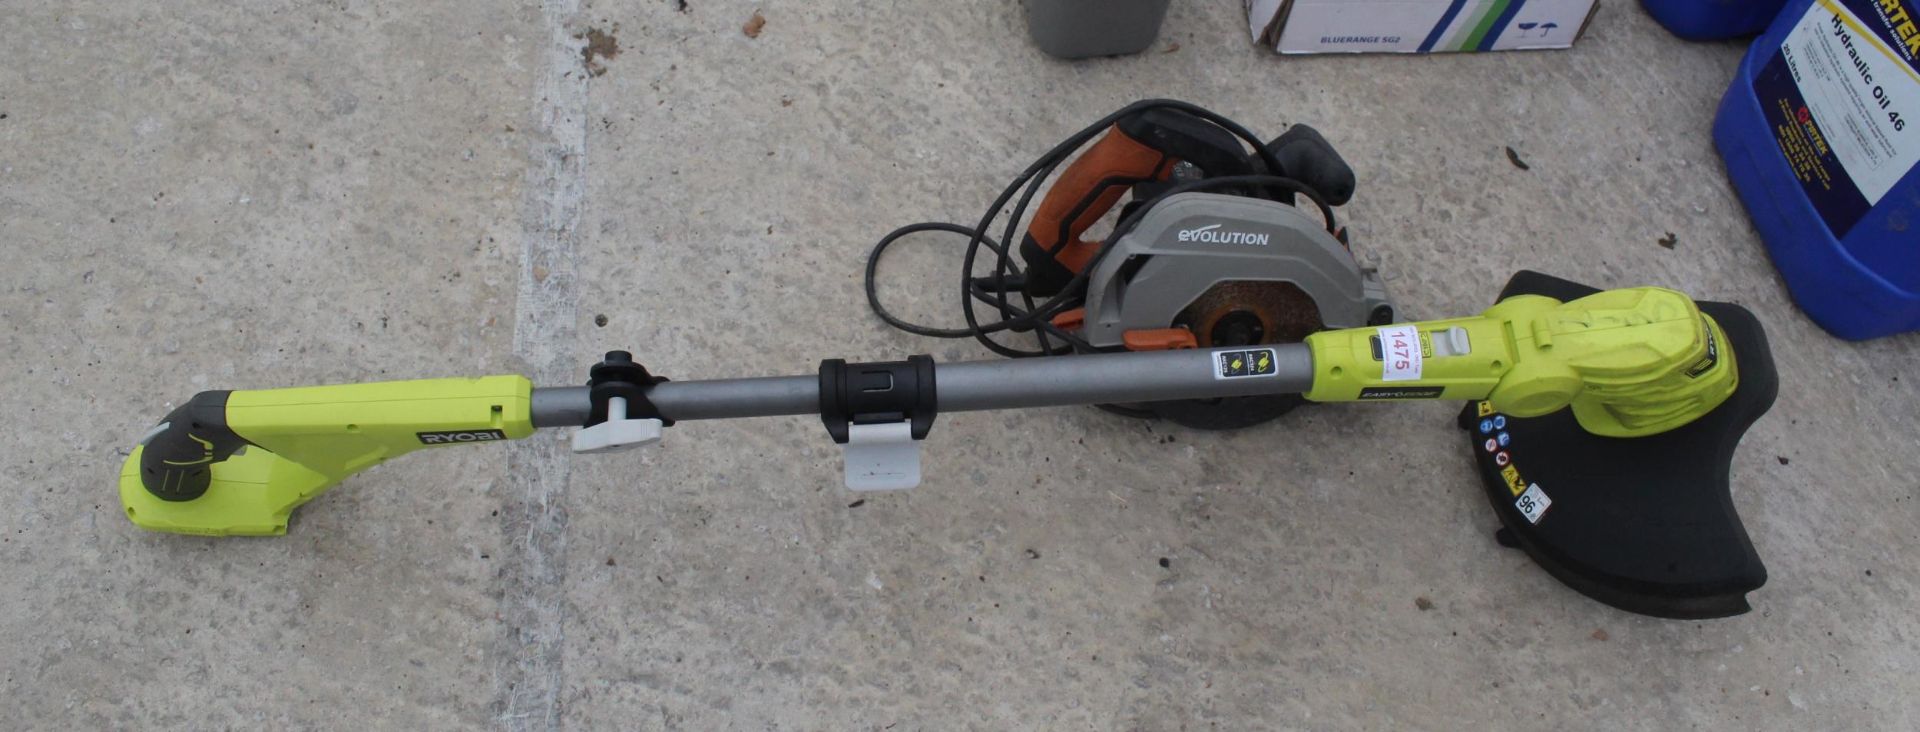 BATTERY STRIMMER AND CIRCULAR SAW NO VAT